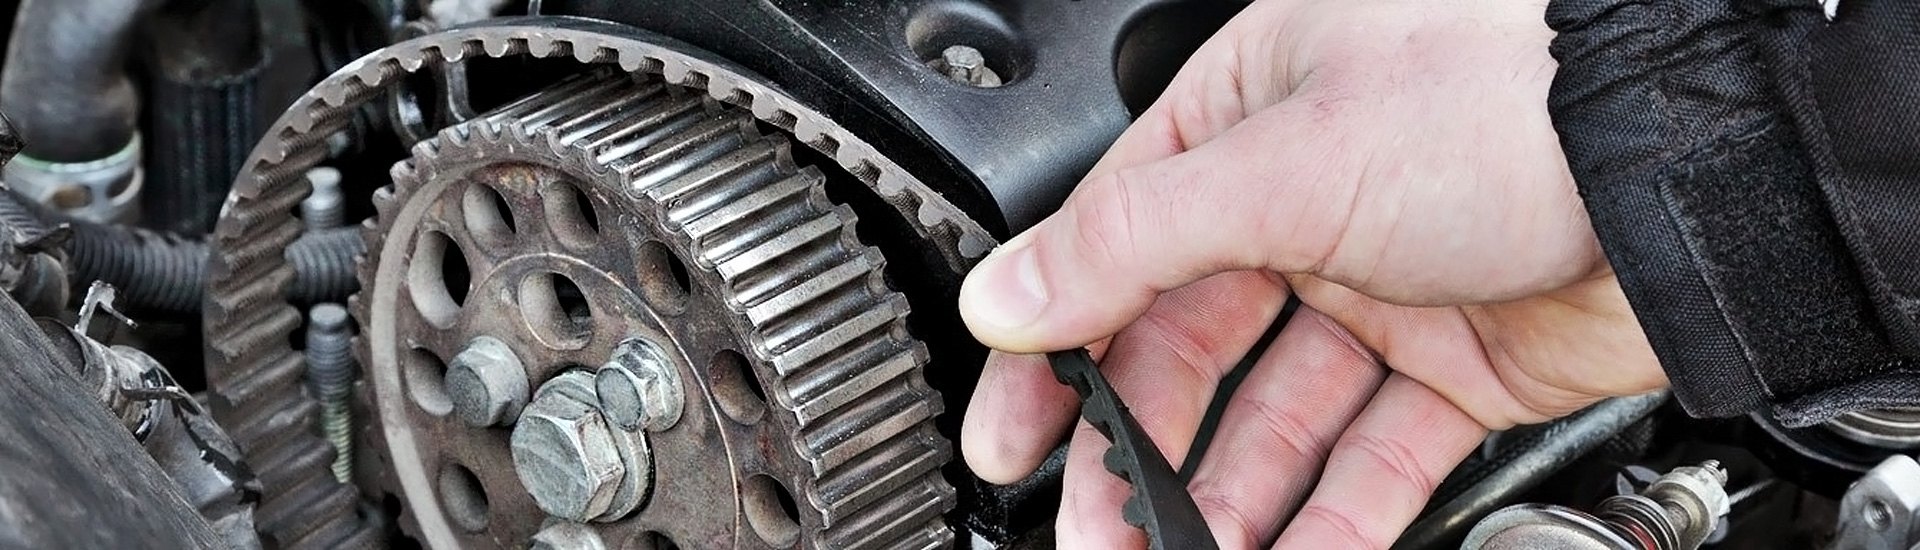 When Is It Time To Replace My Engine Timing Belt?